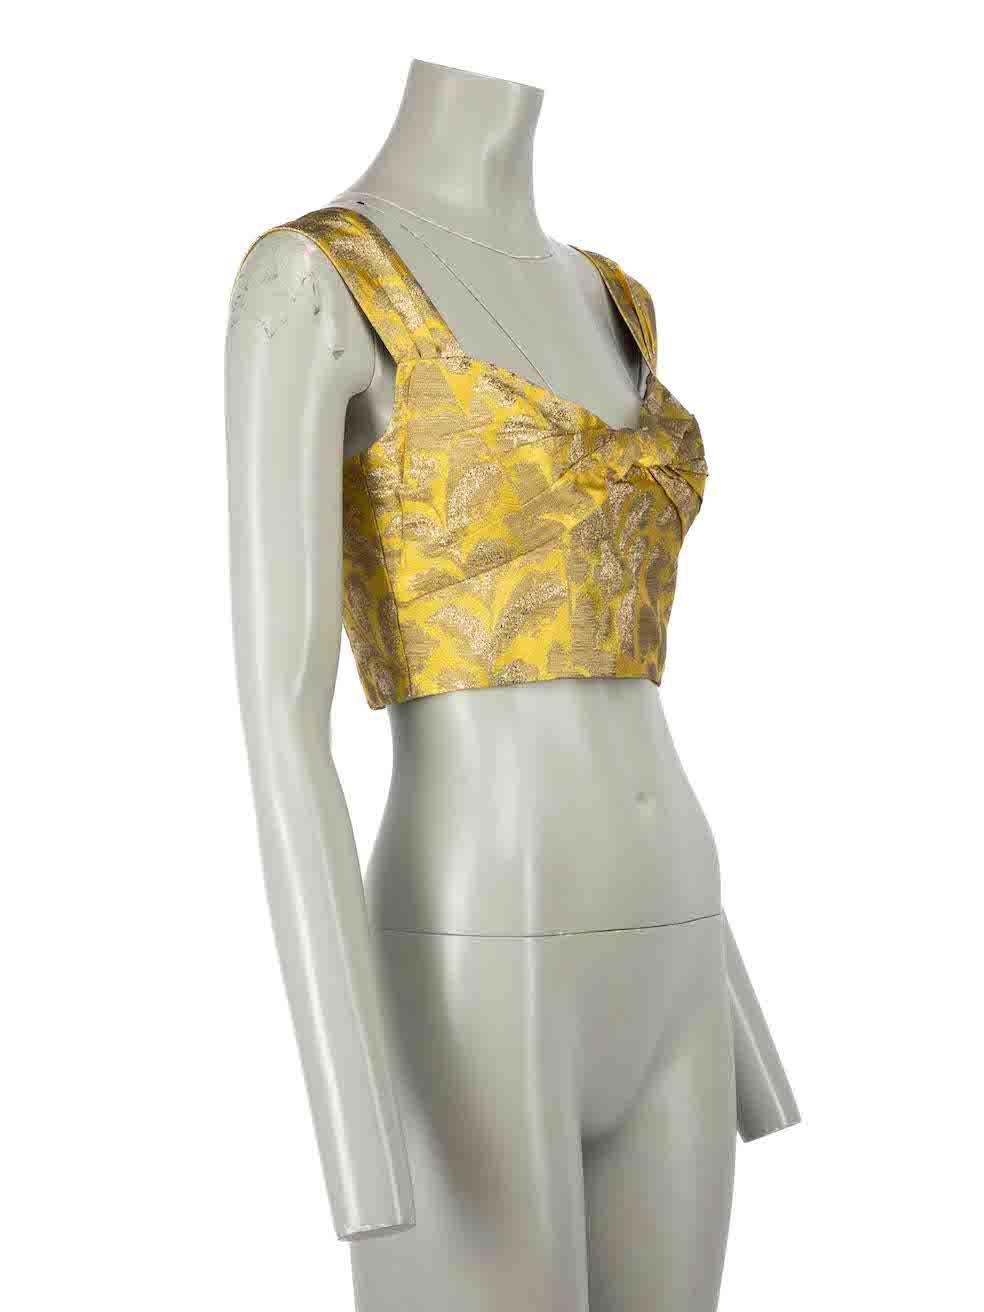 CONDITION is Very good. Hardly any visible wear to top is evident on this used Prada designer resale item.
 
 Details
 Yellow
 Synthetic
 Top
 Metallic thread
 Cropped
 Jacquard floral pattern
 Sleeveless
 Front bow detail
 Back zip fastening
 
 
